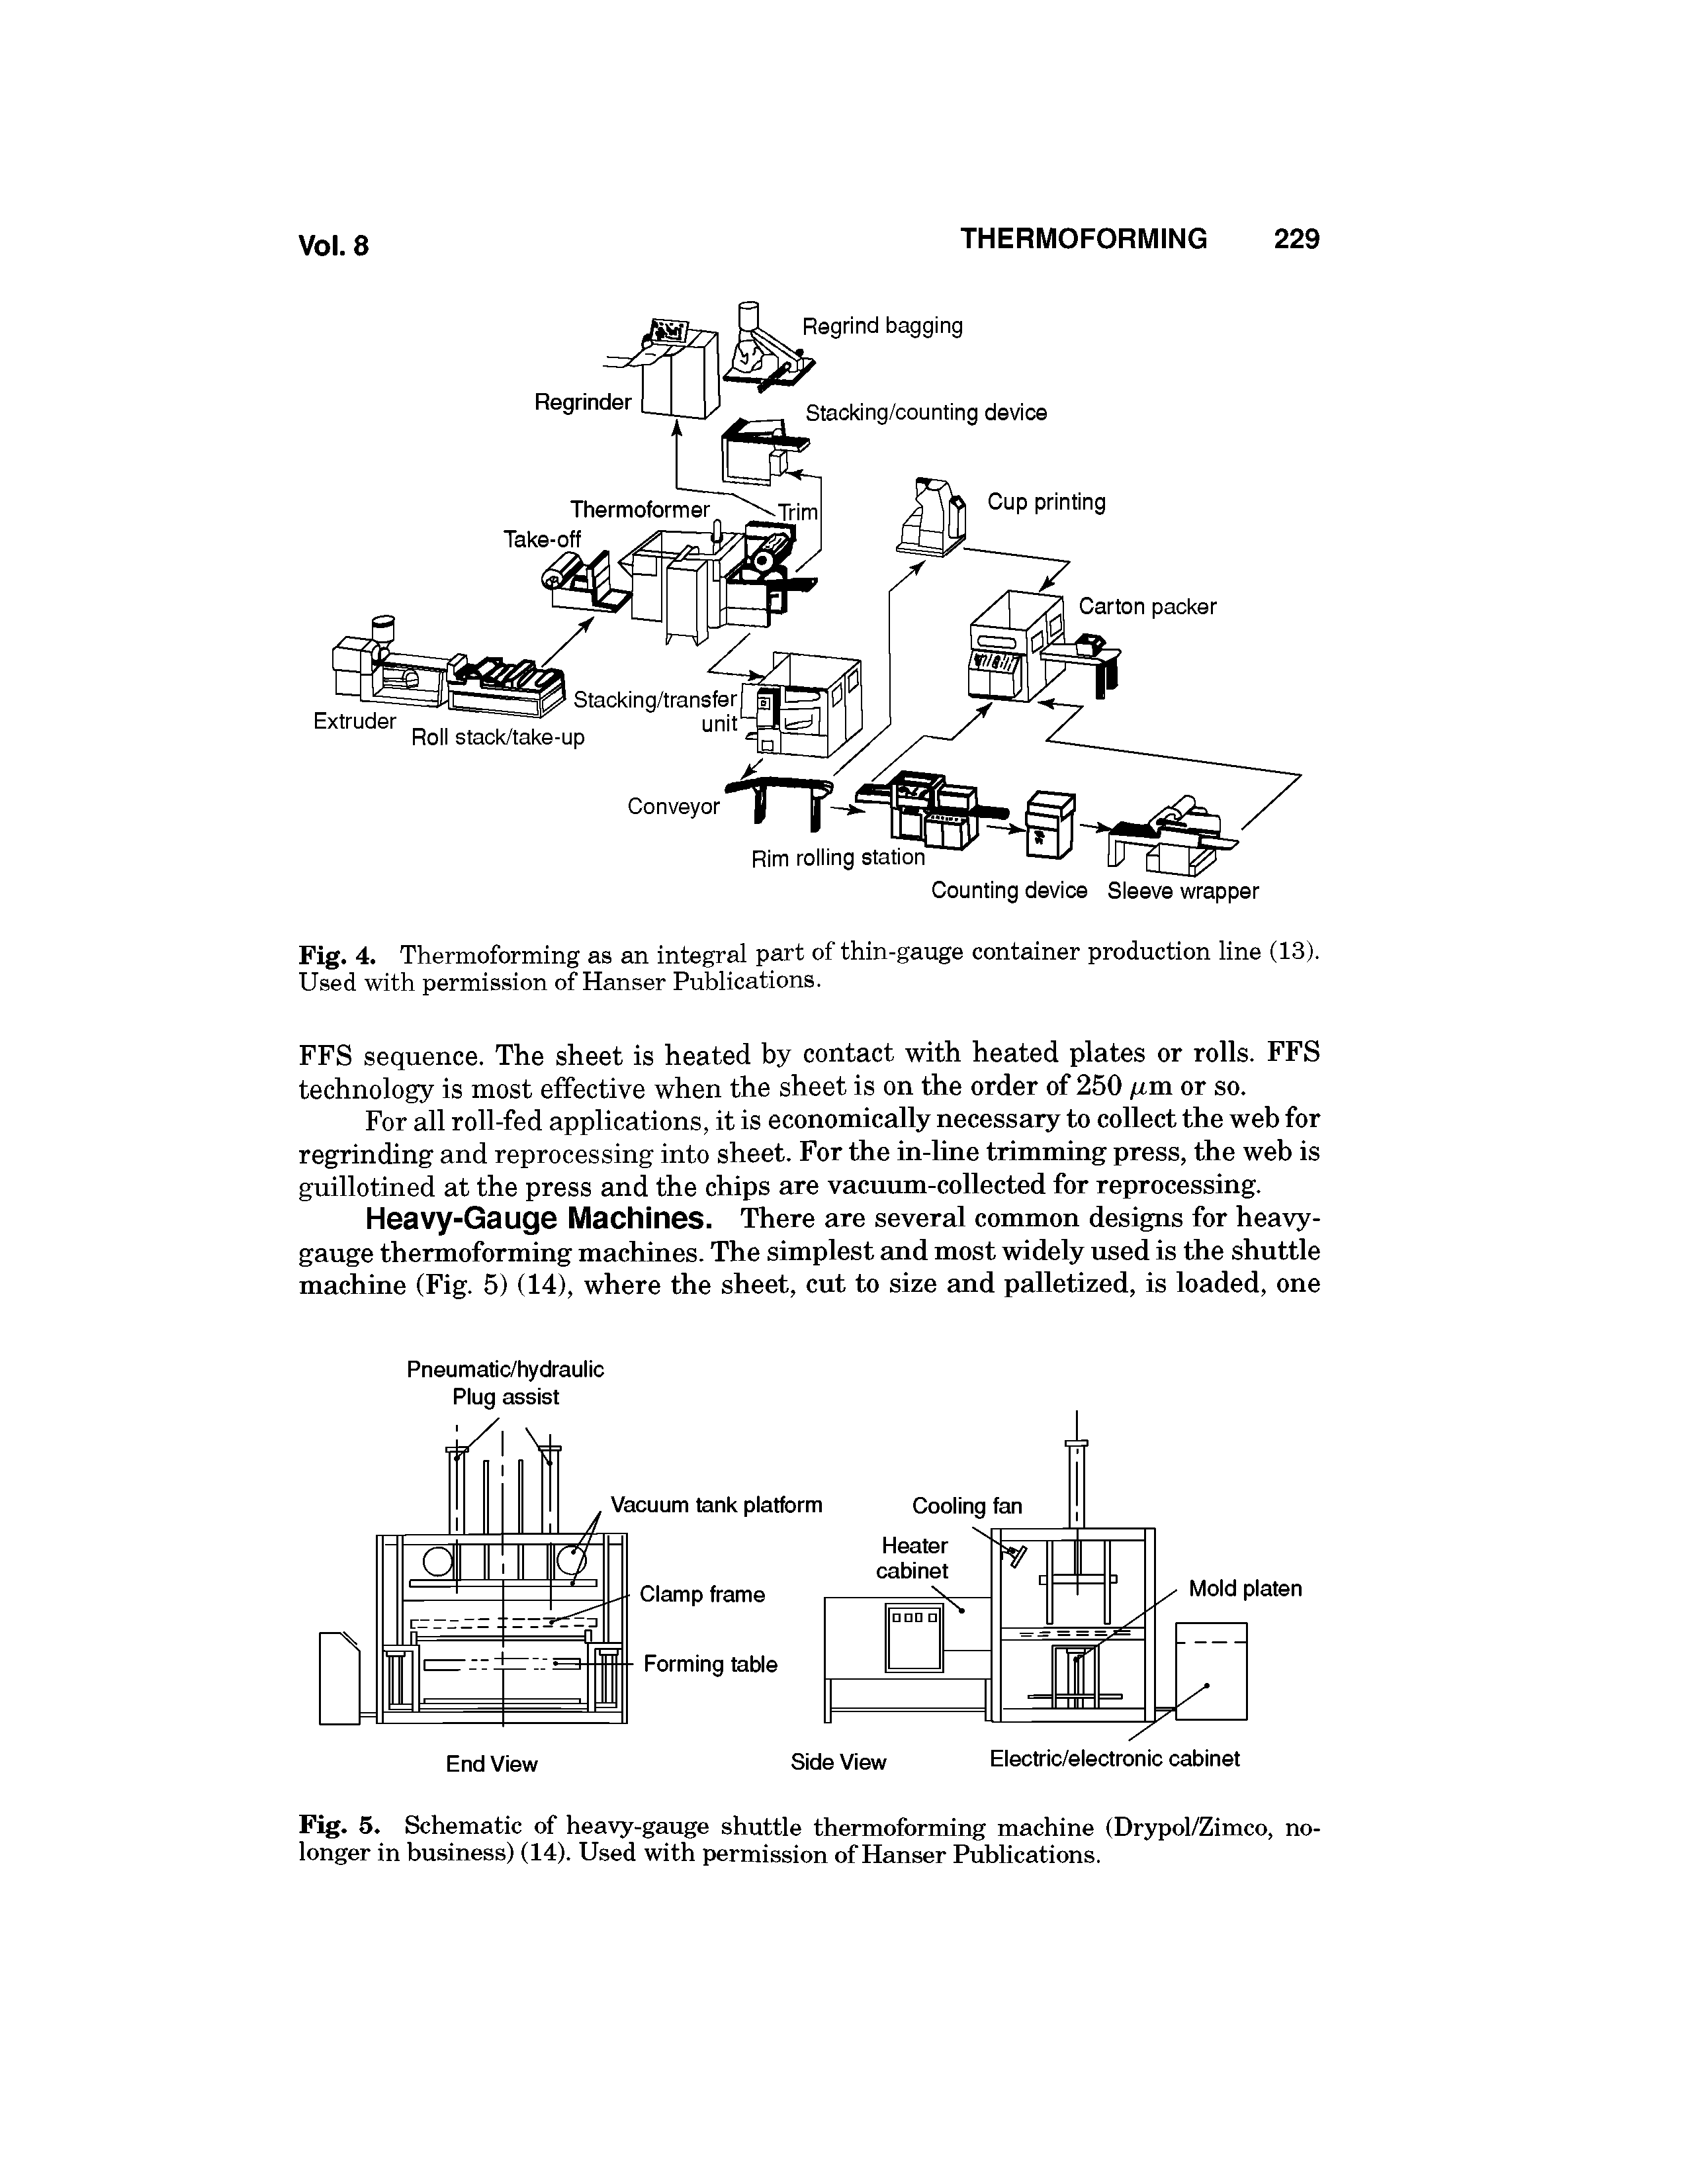 Fig. 5. Schematic of heavy-gauge shuttle thermoforming machine (Drypol/Zimco, no-longer in business) (14). Used with permission of Hanser Publications.